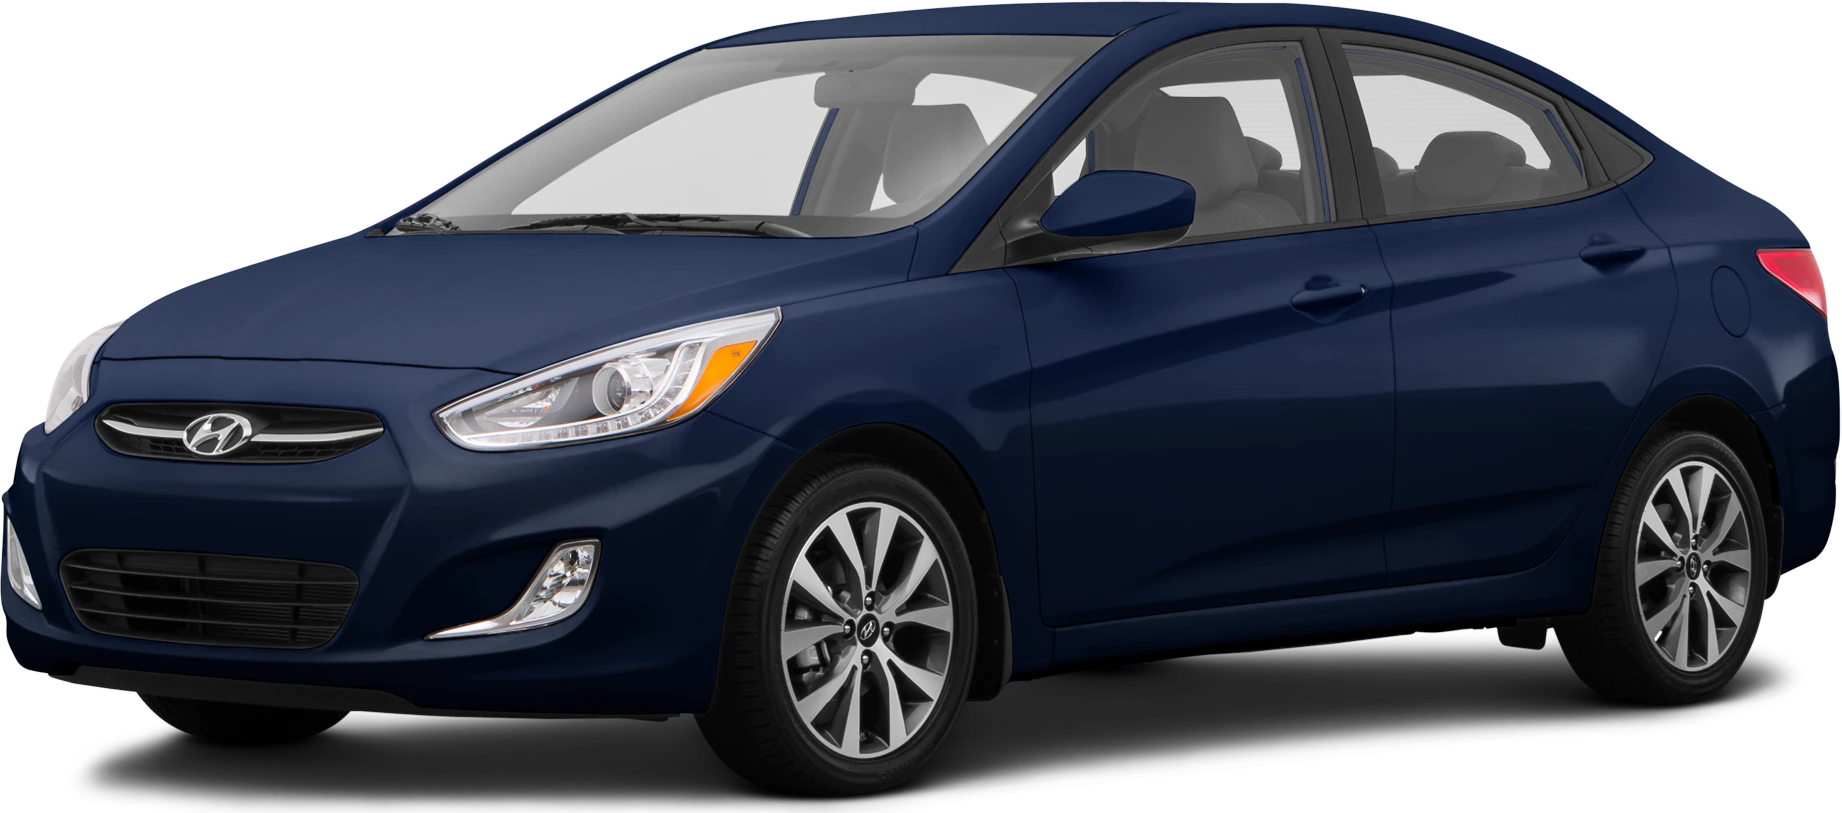 2015-Hyundai-Accent-front_10068_032_1842x813_ZD6_cropped.png